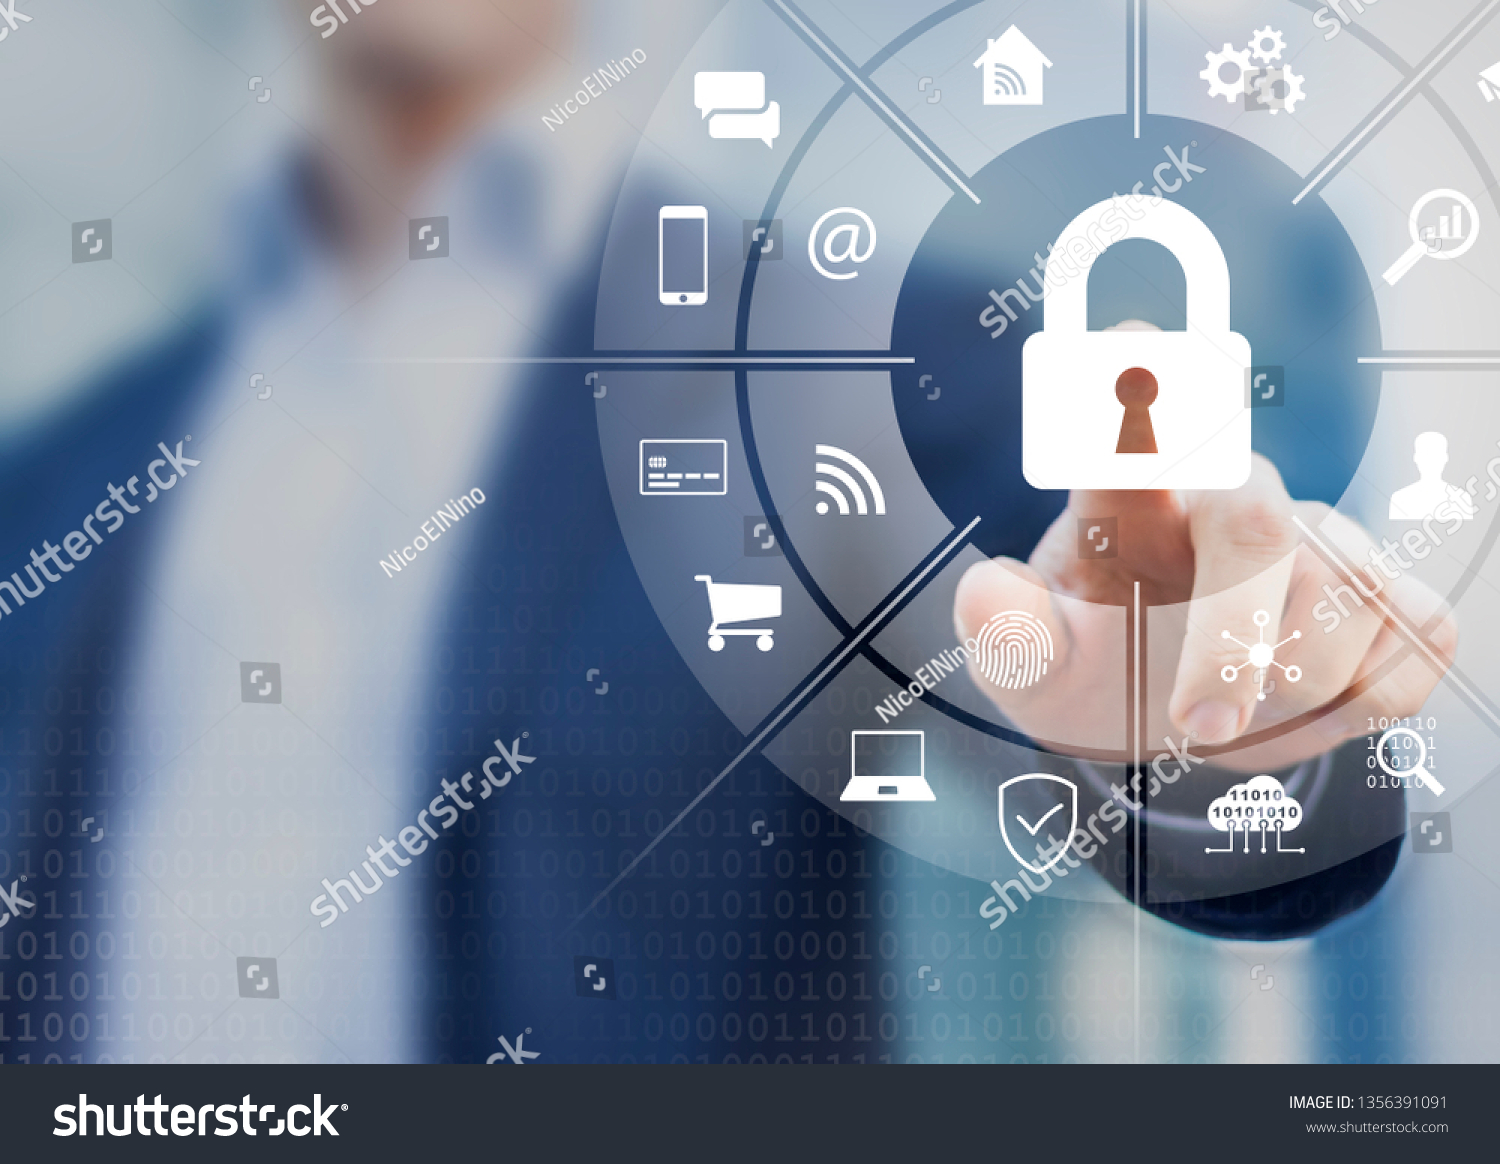 Cybersecurity on internet with person touching interface with icons of wireless network connection access on mobile, online payment, smartphone app, smart home, IoT, protect data against cyber crime #1356391091